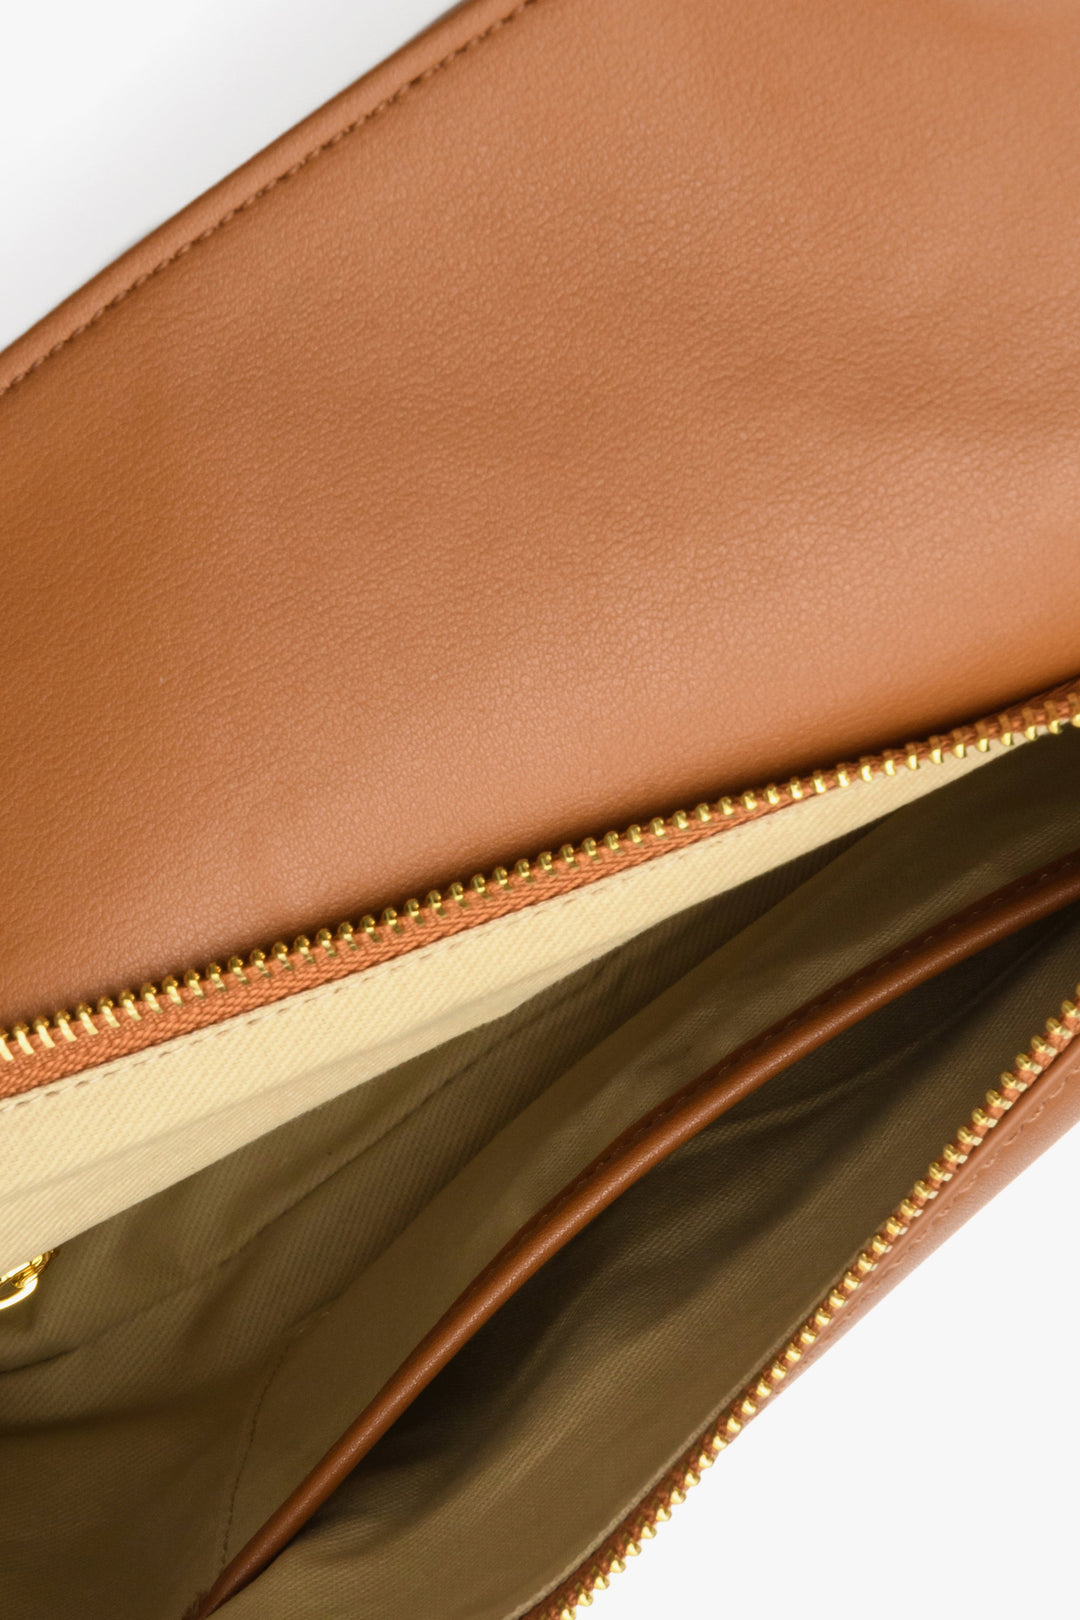 Leather women's handbag in brown by Estro - close-up on the details.